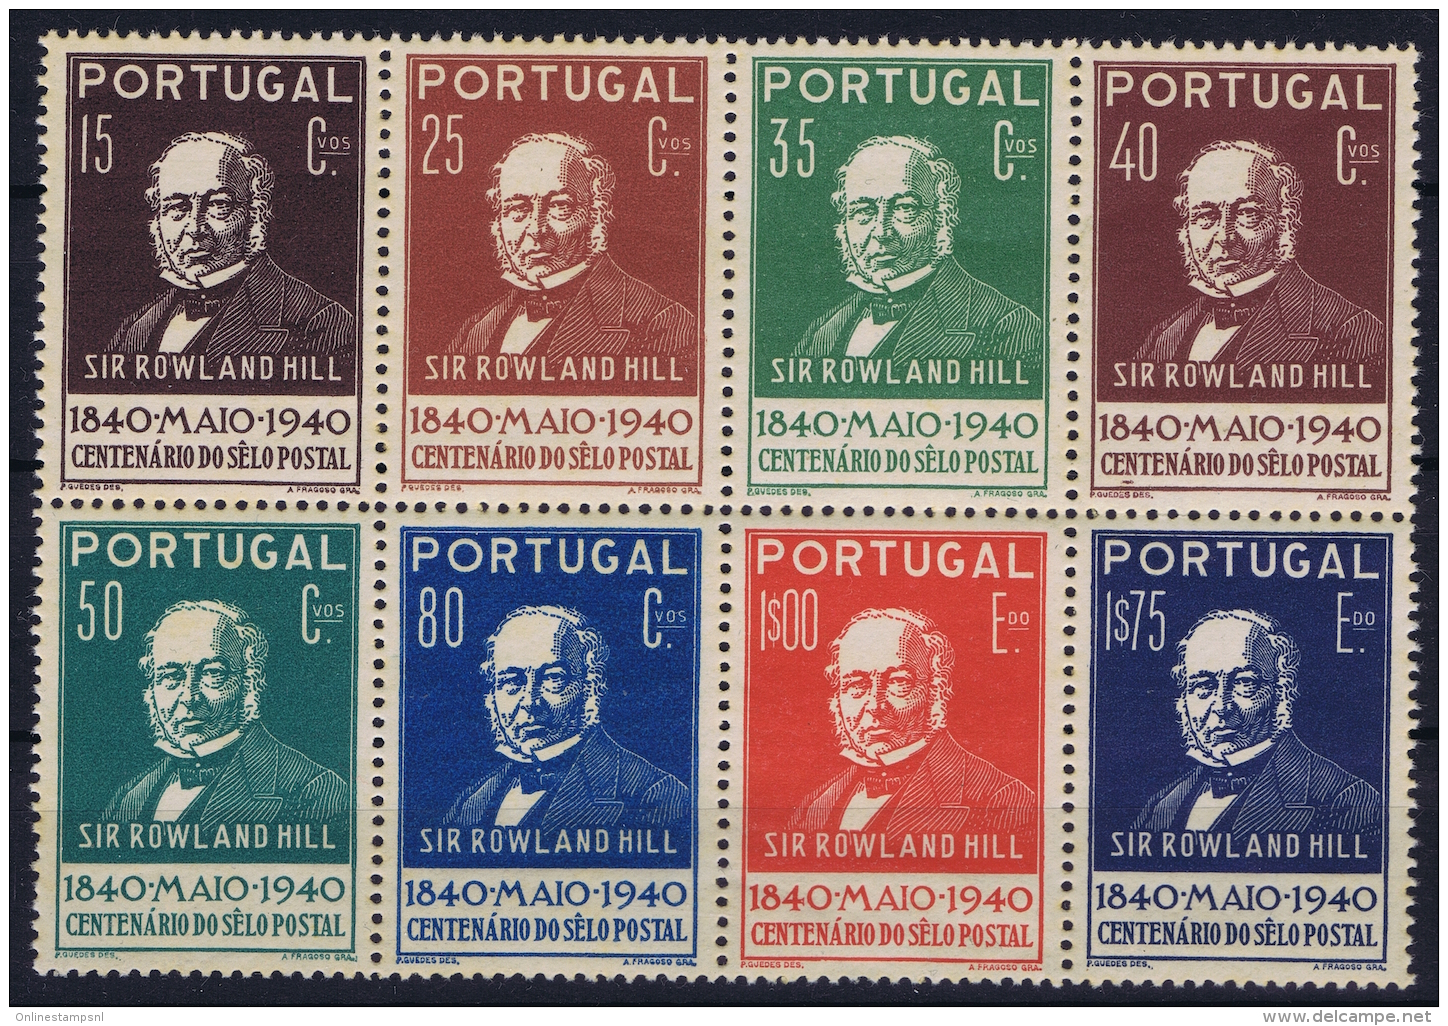 Portugal: Mi Nr 622 - 629  MNH/**/postfrisch/neuf Sans Charniere  1940 Some Ink On Back From Printing - Neufs